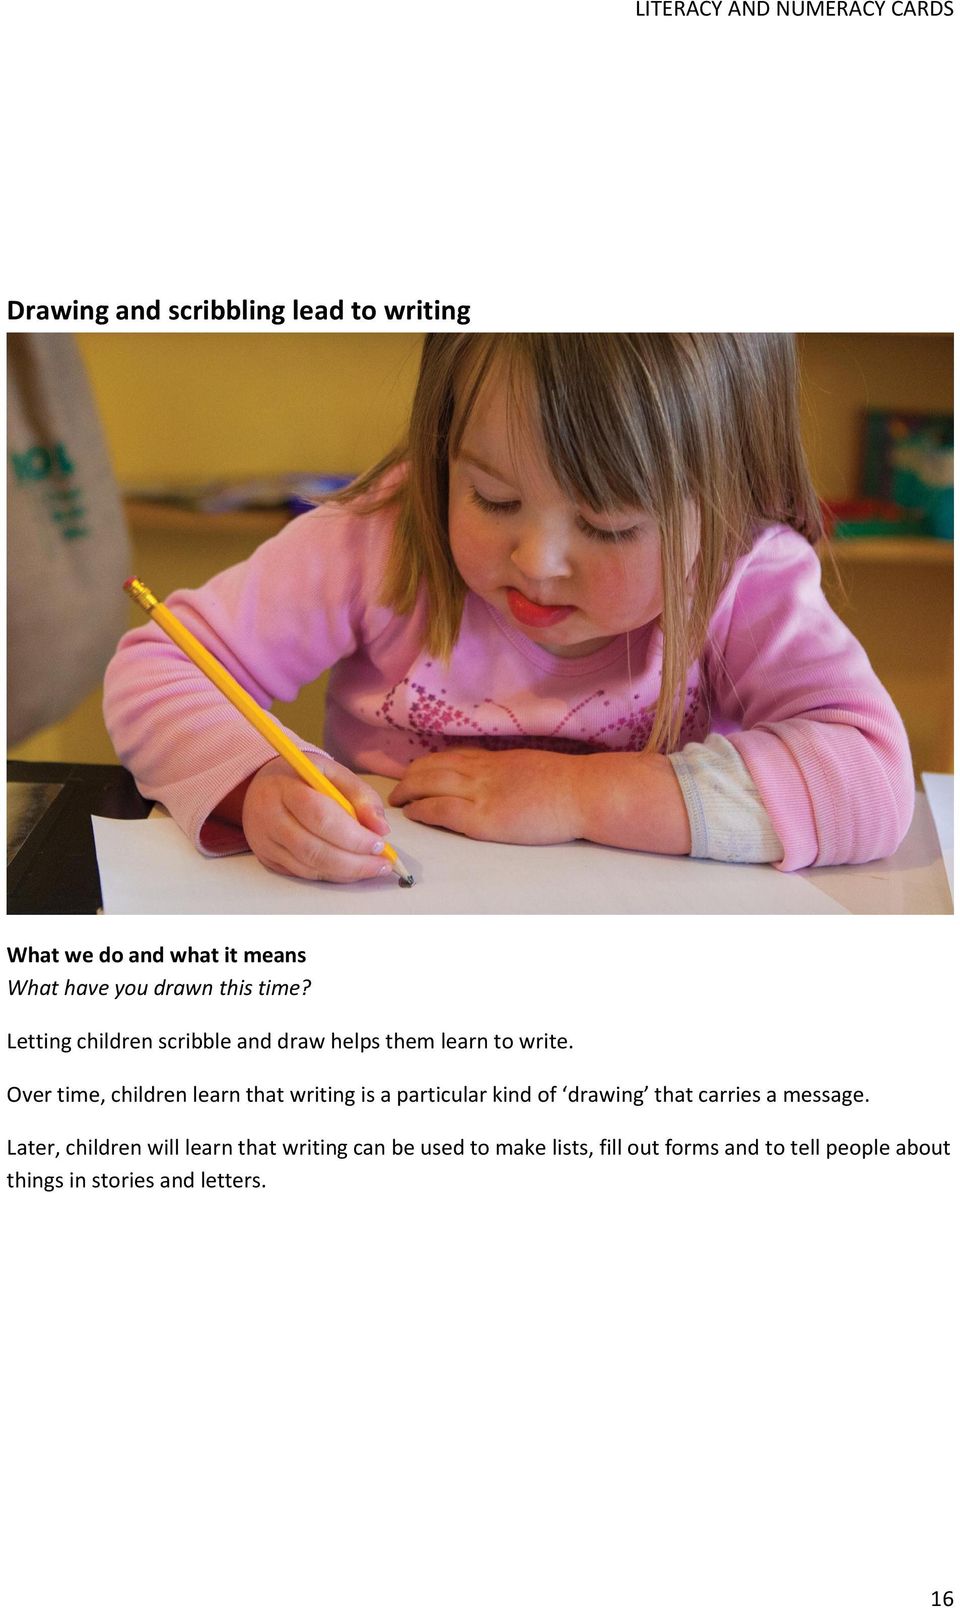 Over time, children learn that writing is a particular kind of drawing that carries a